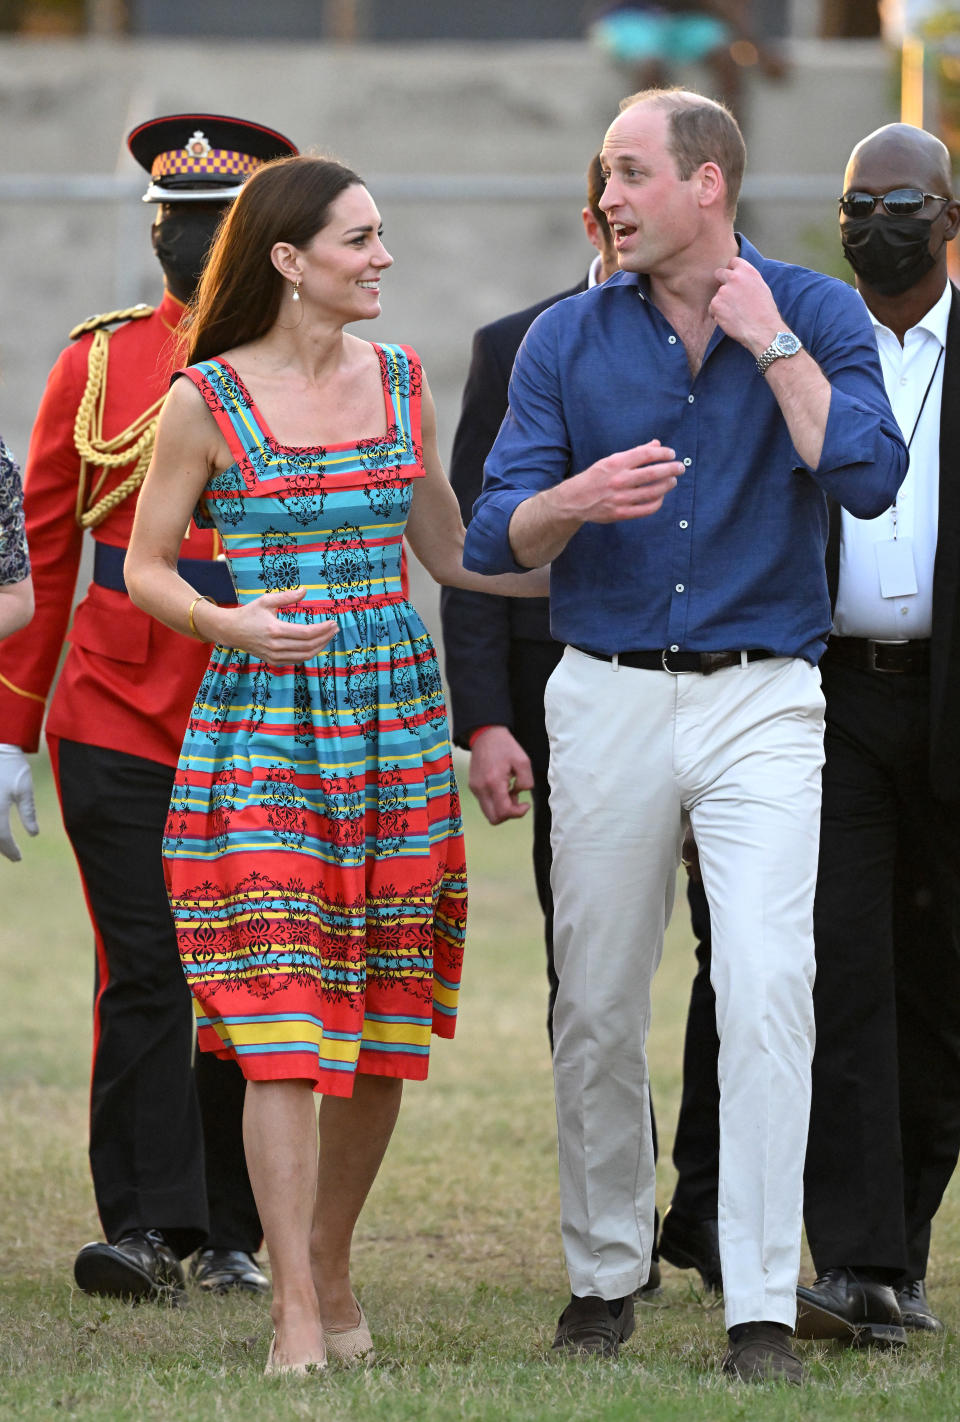 Catherine, Duchess of Cambridge and Prince William, Duke of Cambridge, visit Trench Town, the birthplace of reggae music, on March 22, 2022 in Kingston, Jamaica. Their Royal Highnesses will join some young football players and visit the Trench Town Culture Yard Museum where Bob Marley used to live. (WireImage/Getty Images))